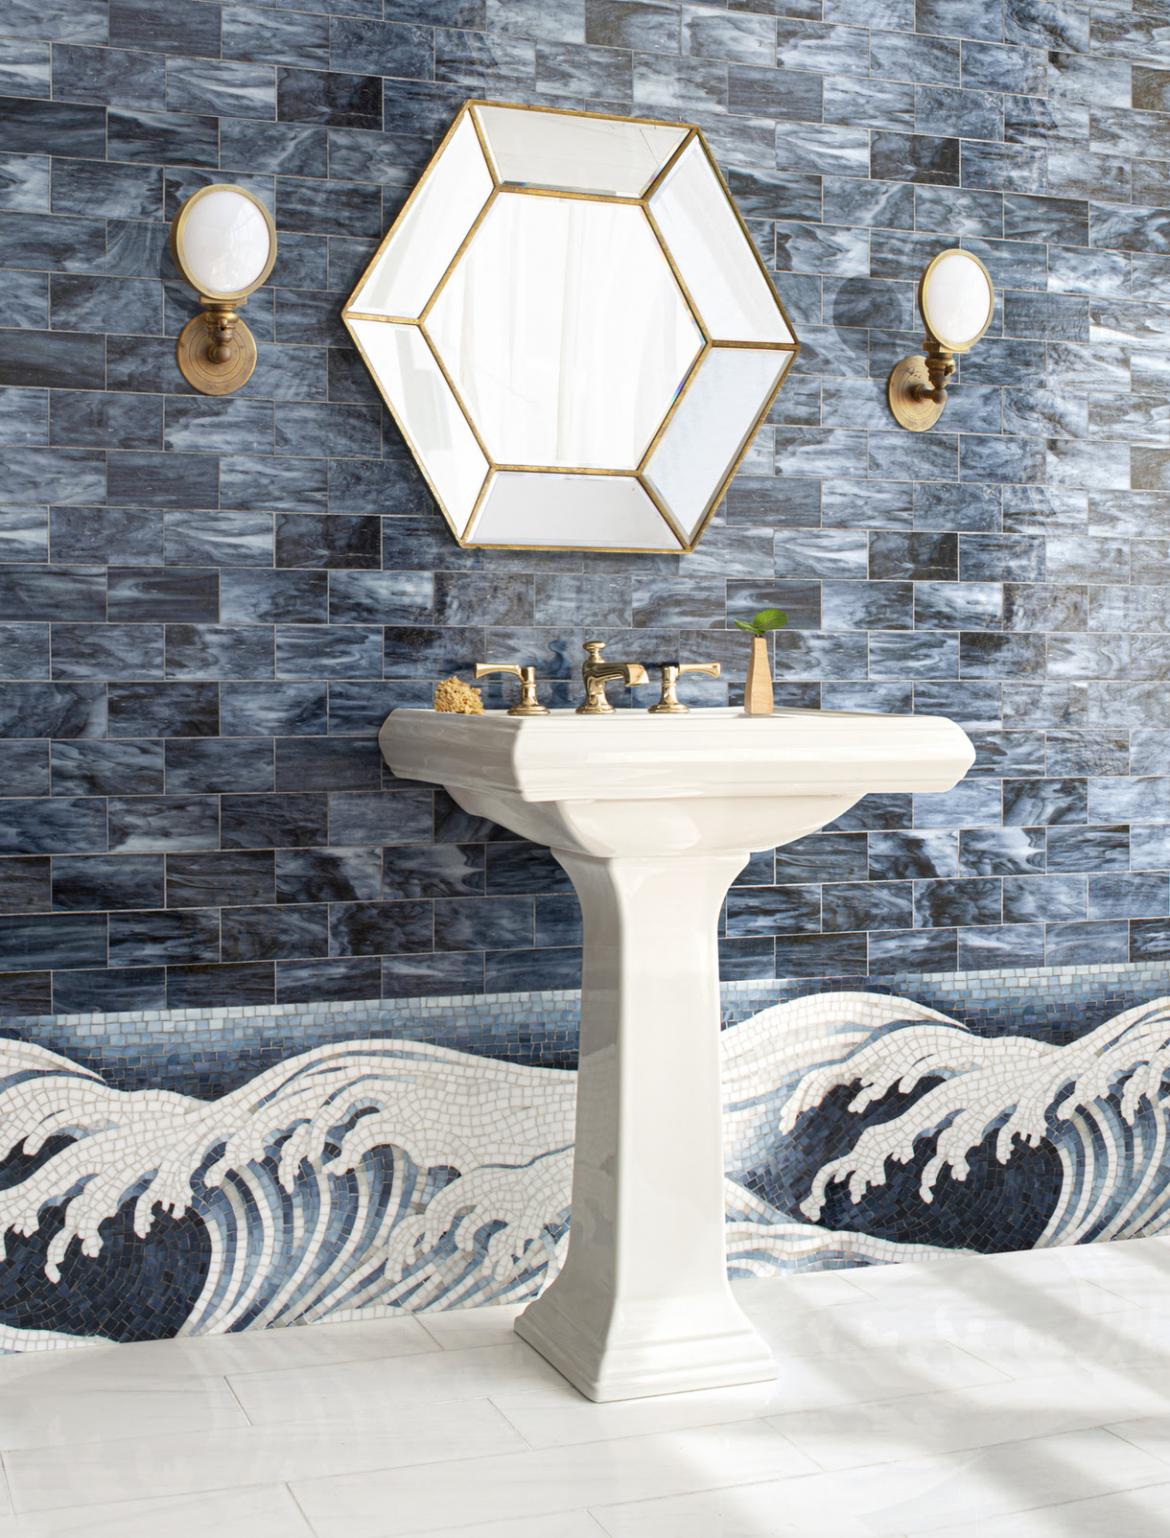 New Ravenna Gracie Collection Hand Painted Glass Mosaics Waves